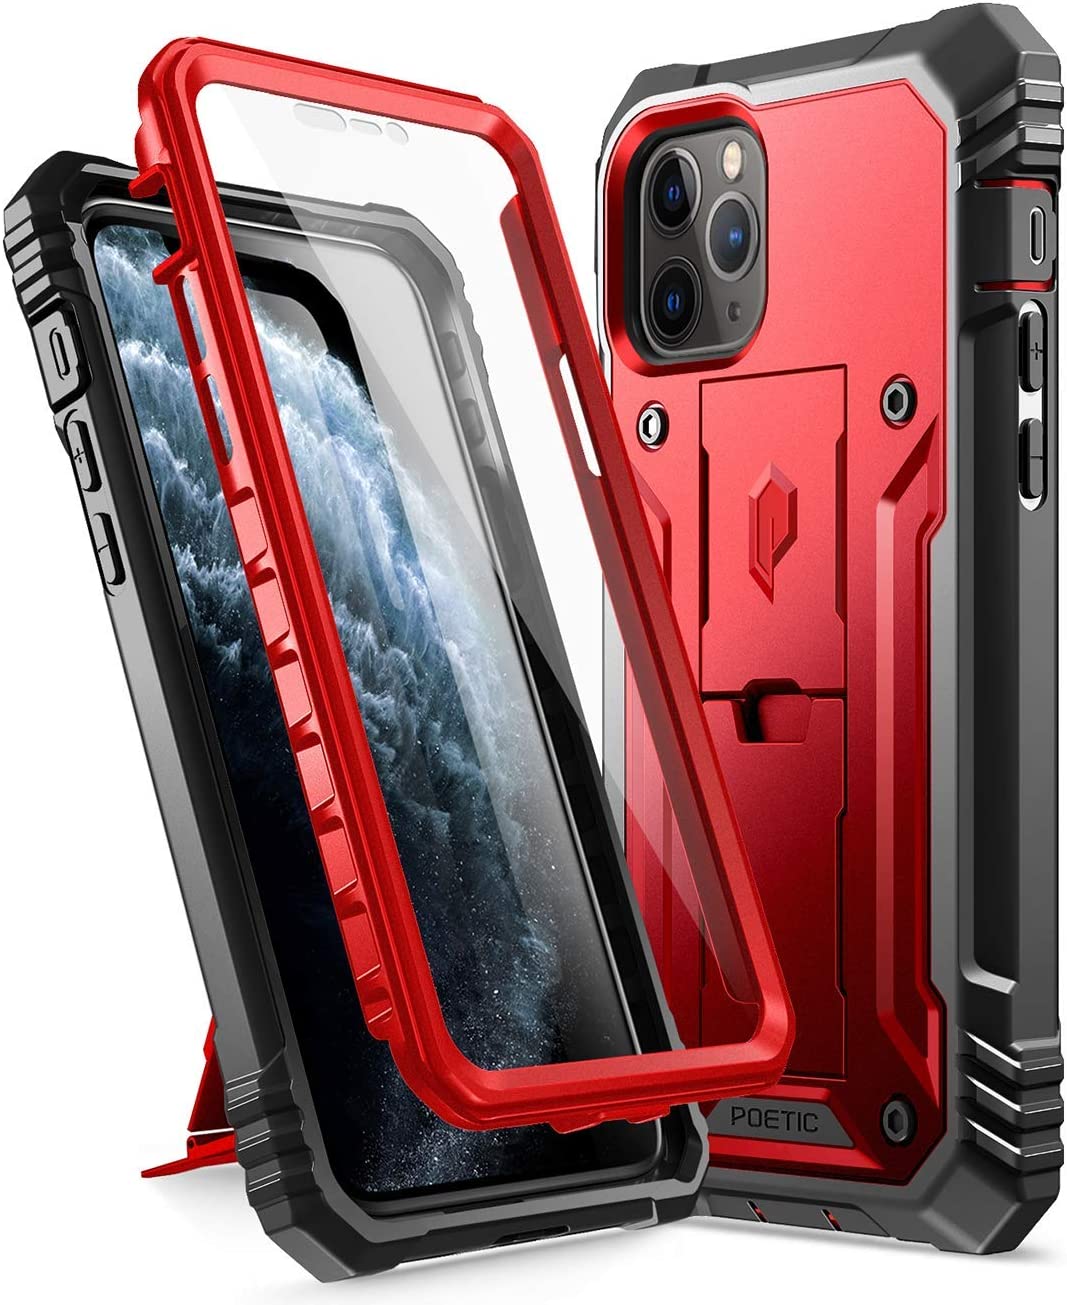 Rugged Case - iPhone 11 Pro Max